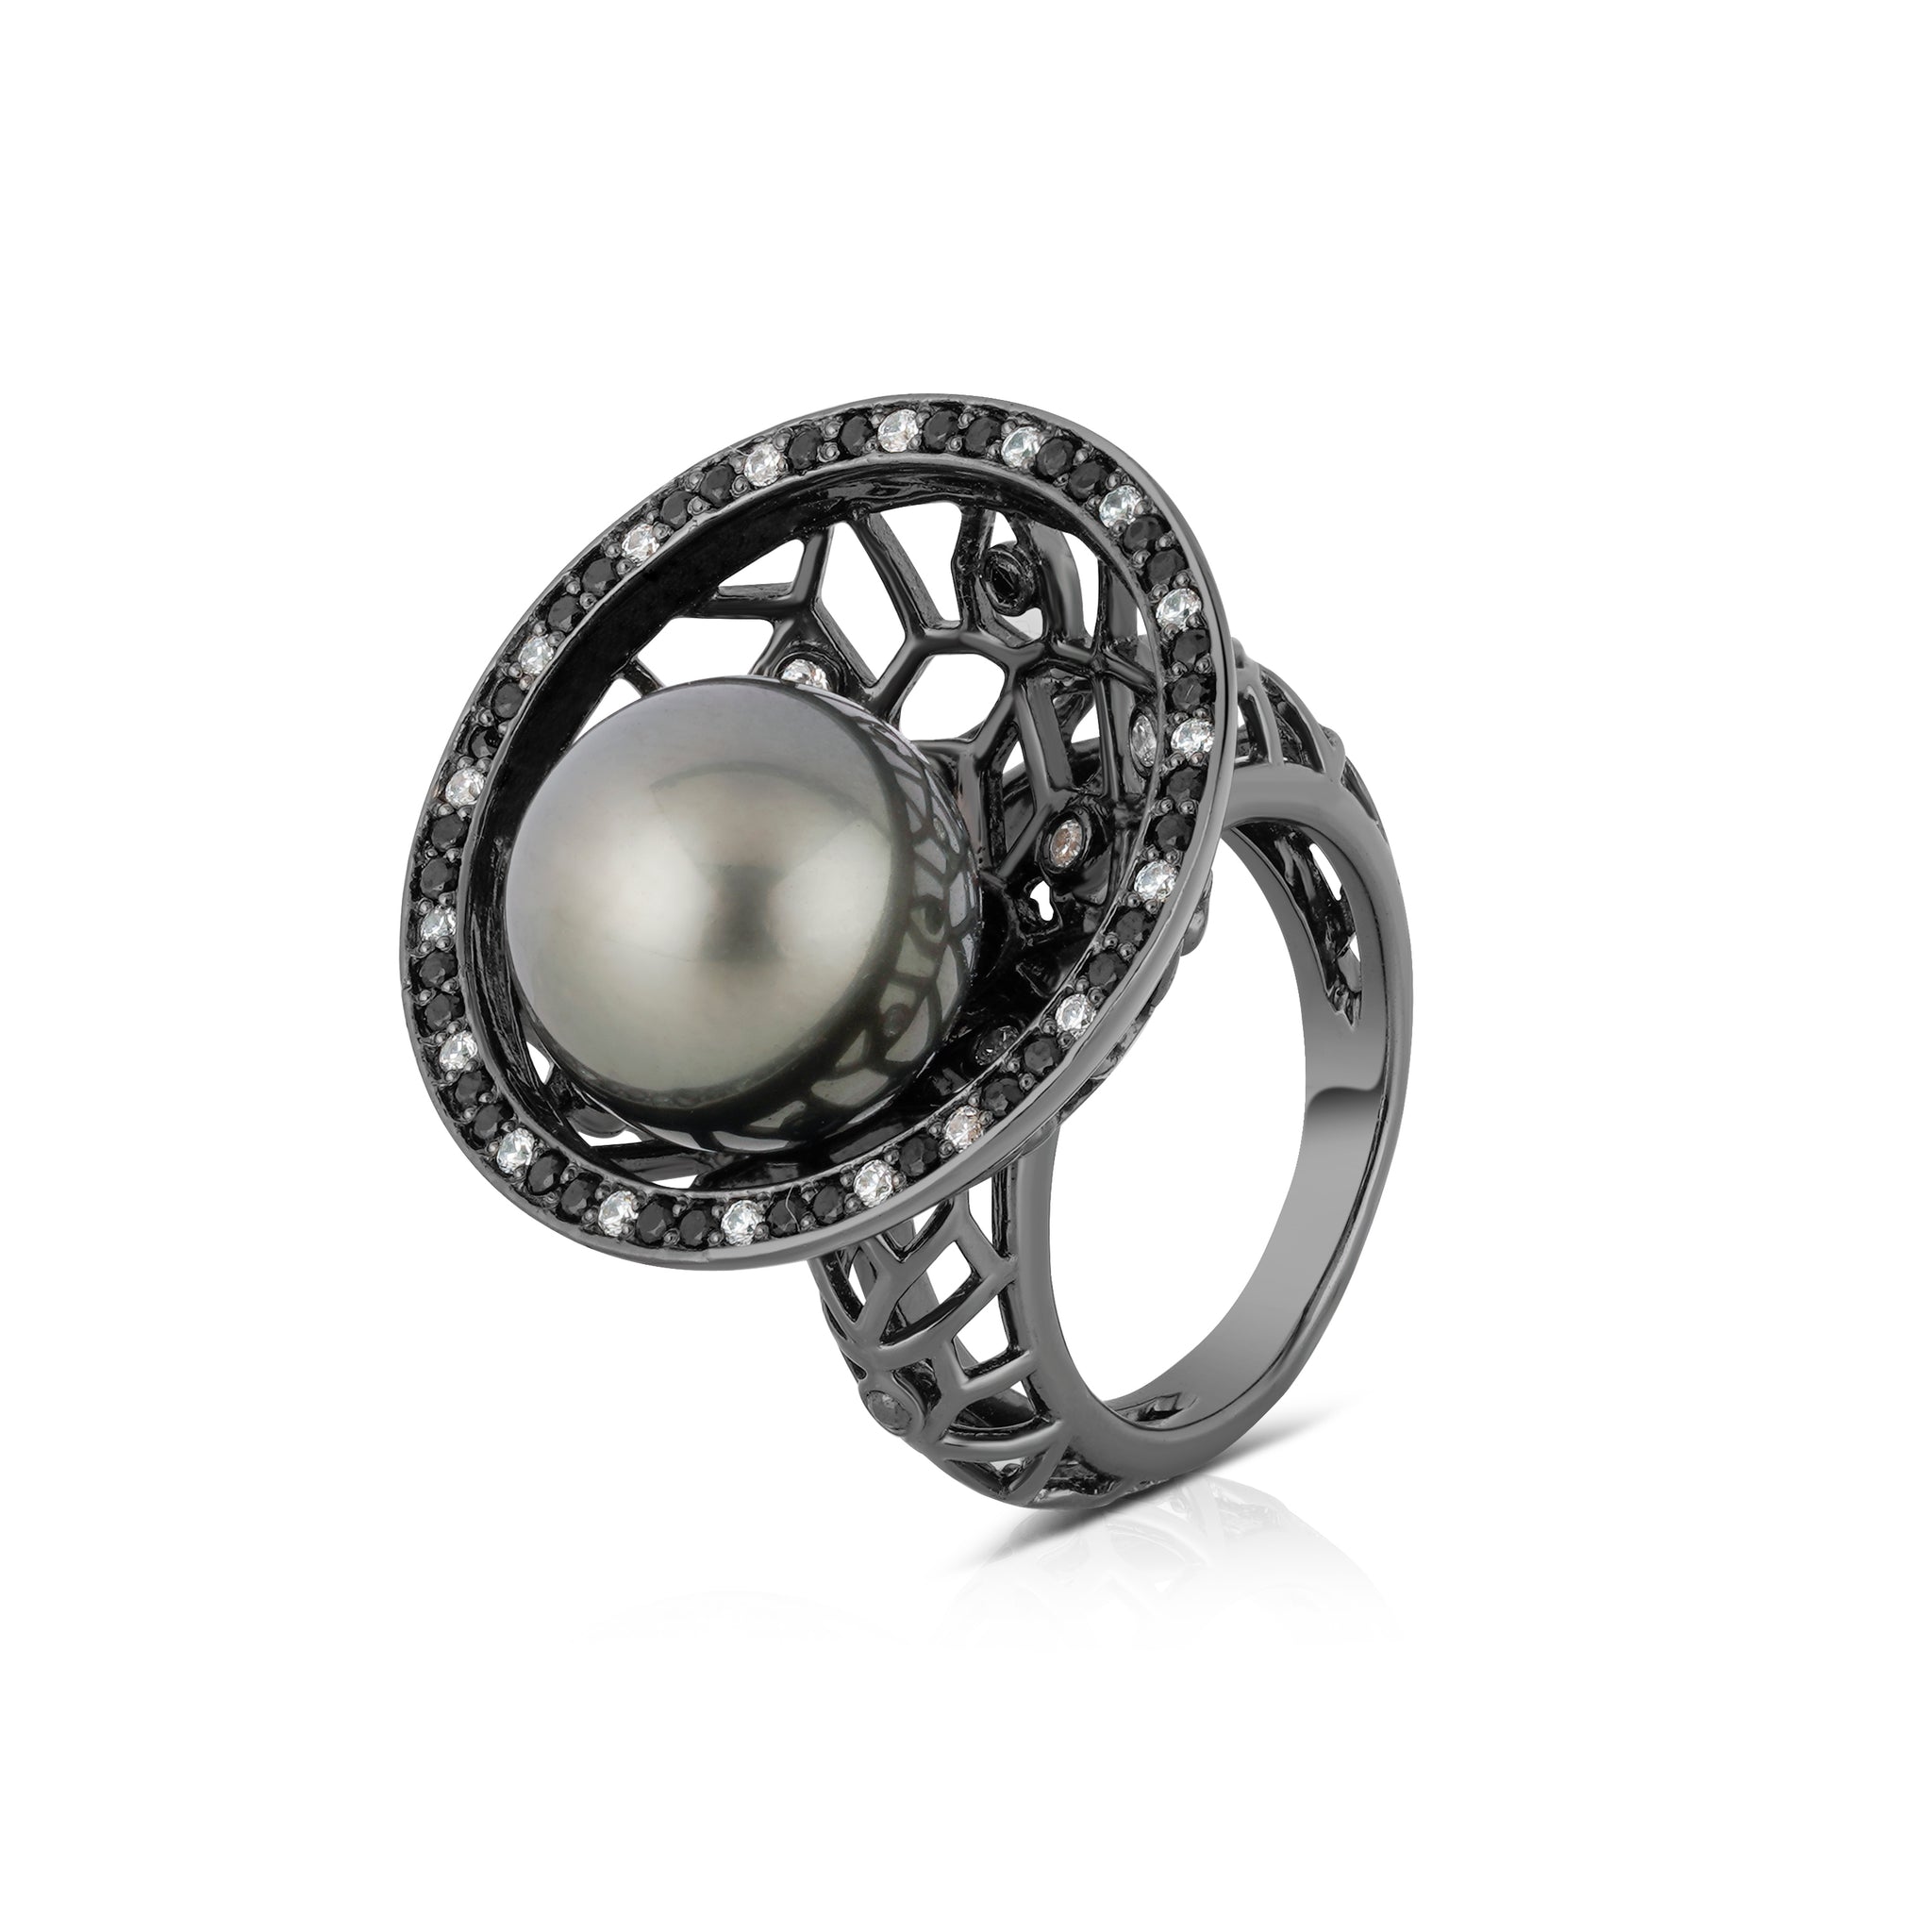 The Mythical Planet Ring - Charcoal Charm